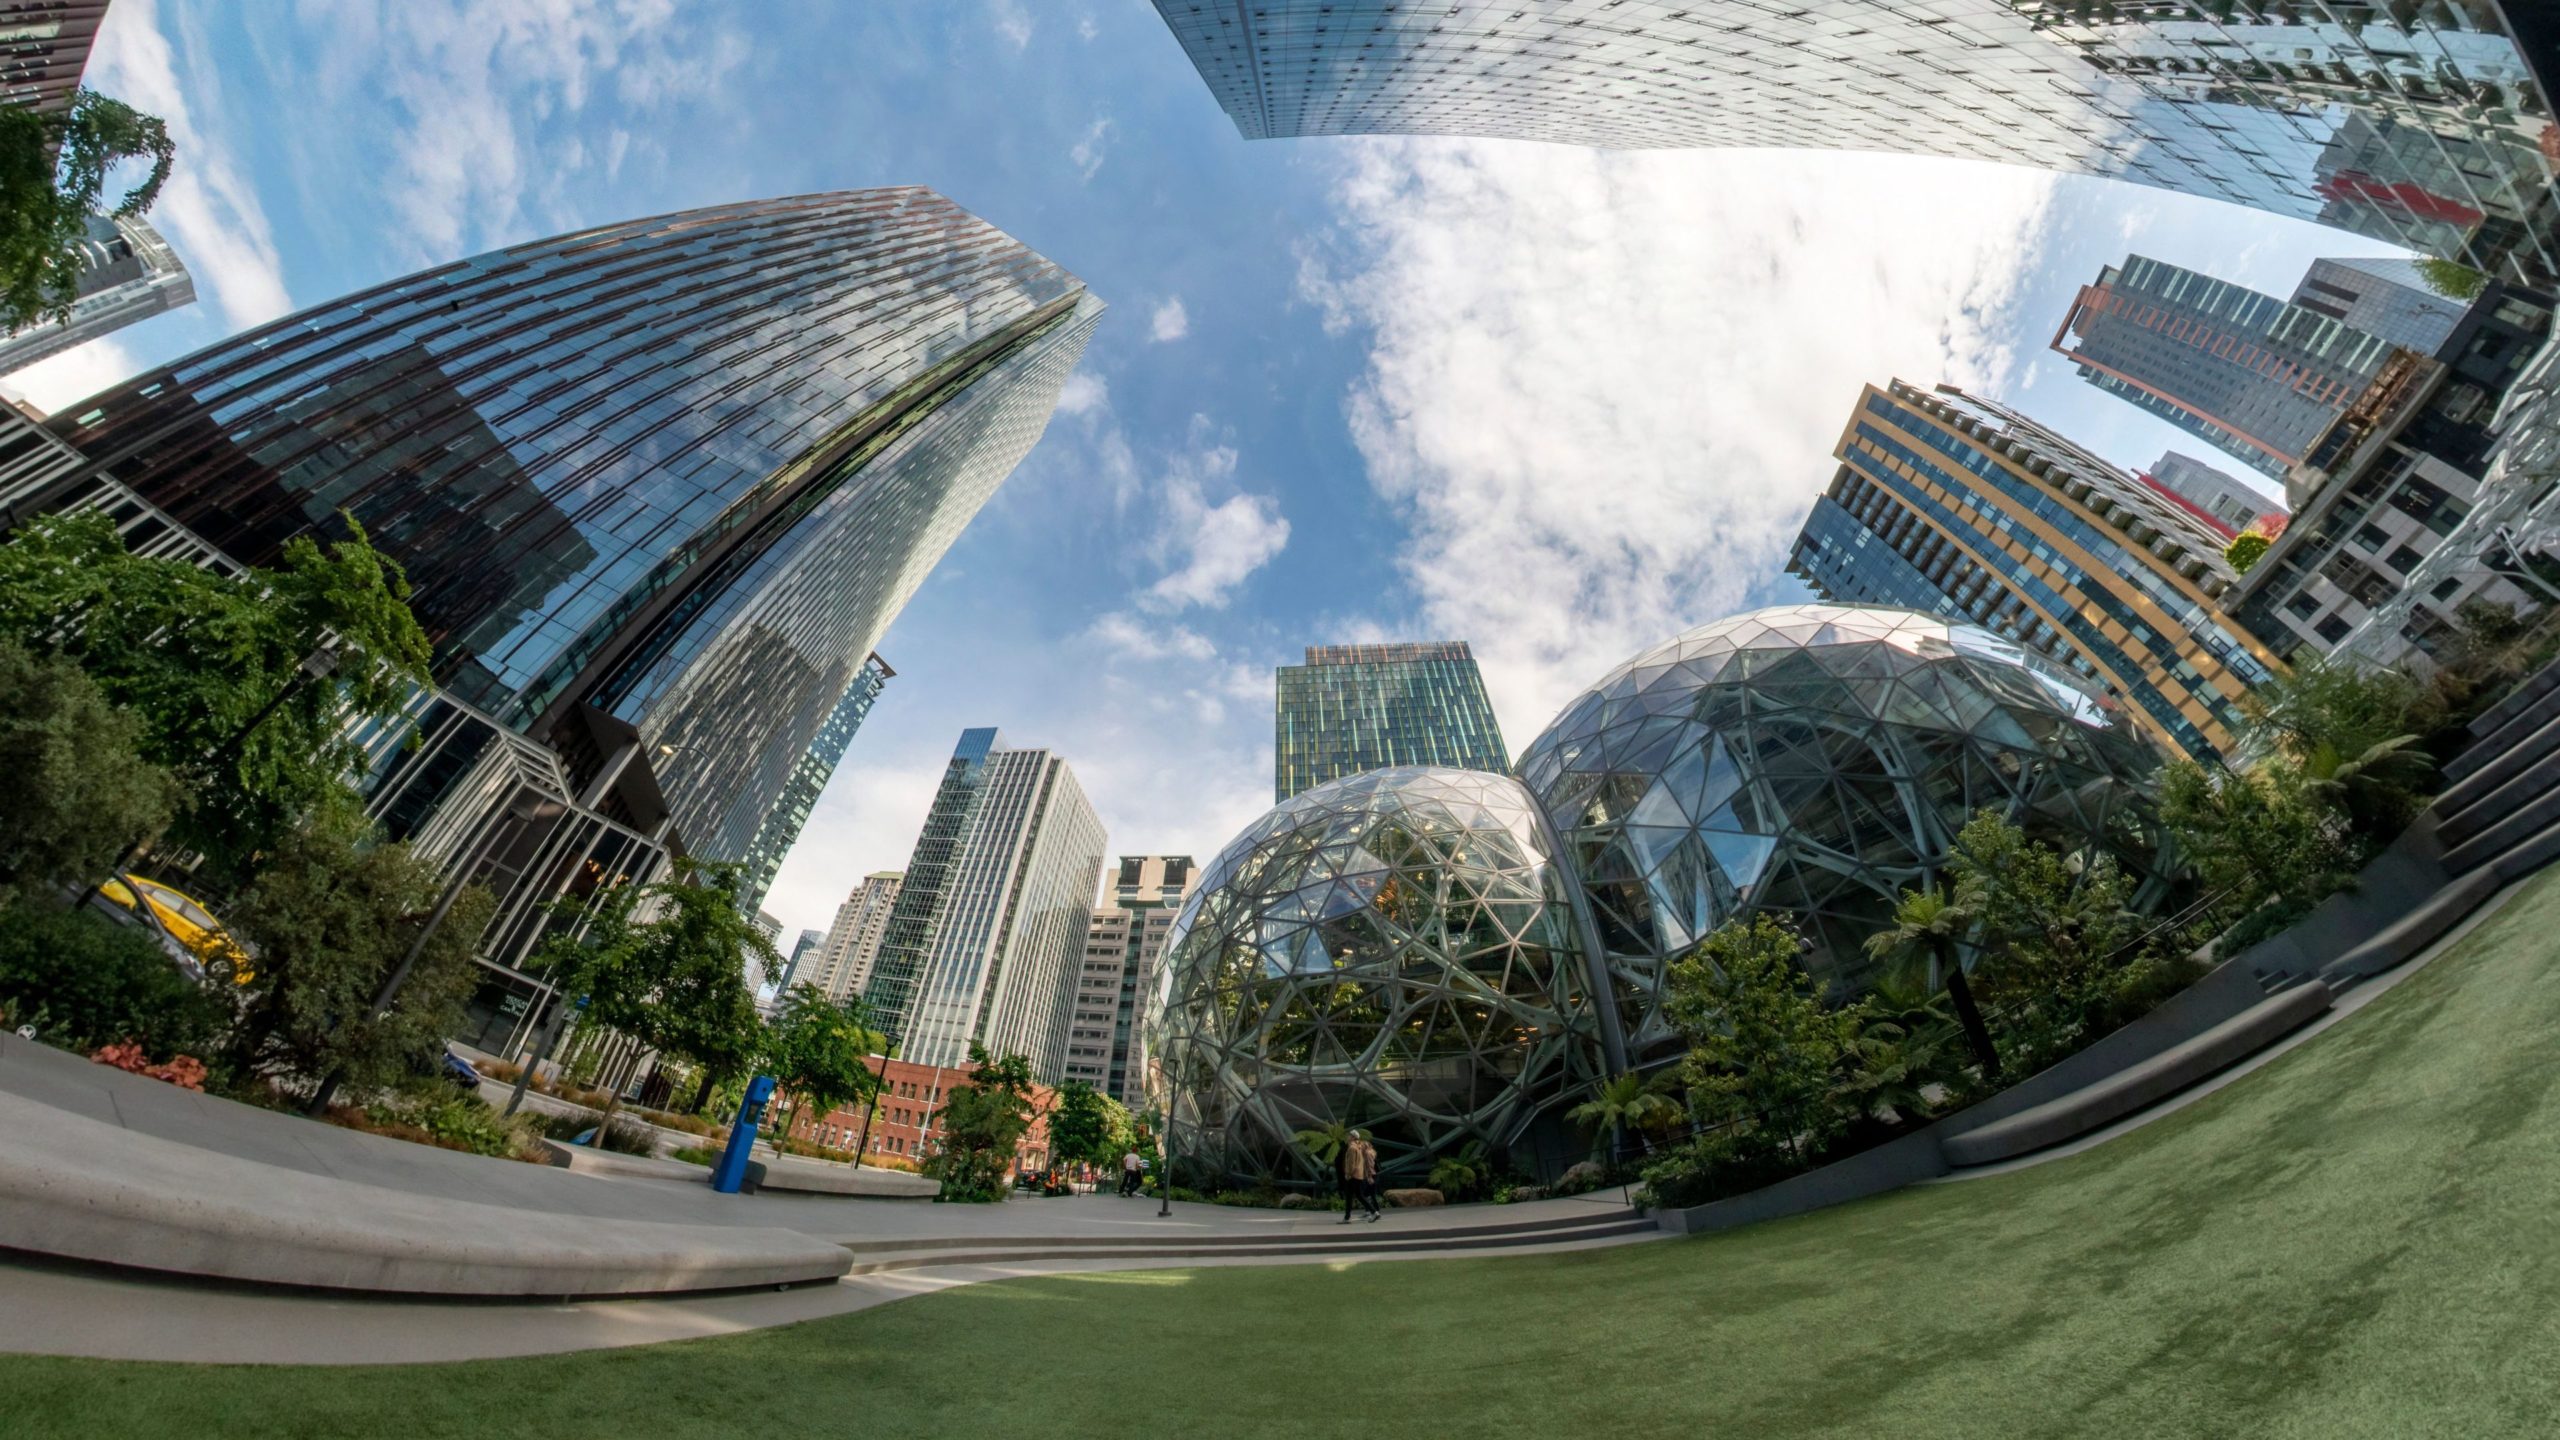 360° Photo. The Spheres are a place where employees can think and work differently surrounded by plants.